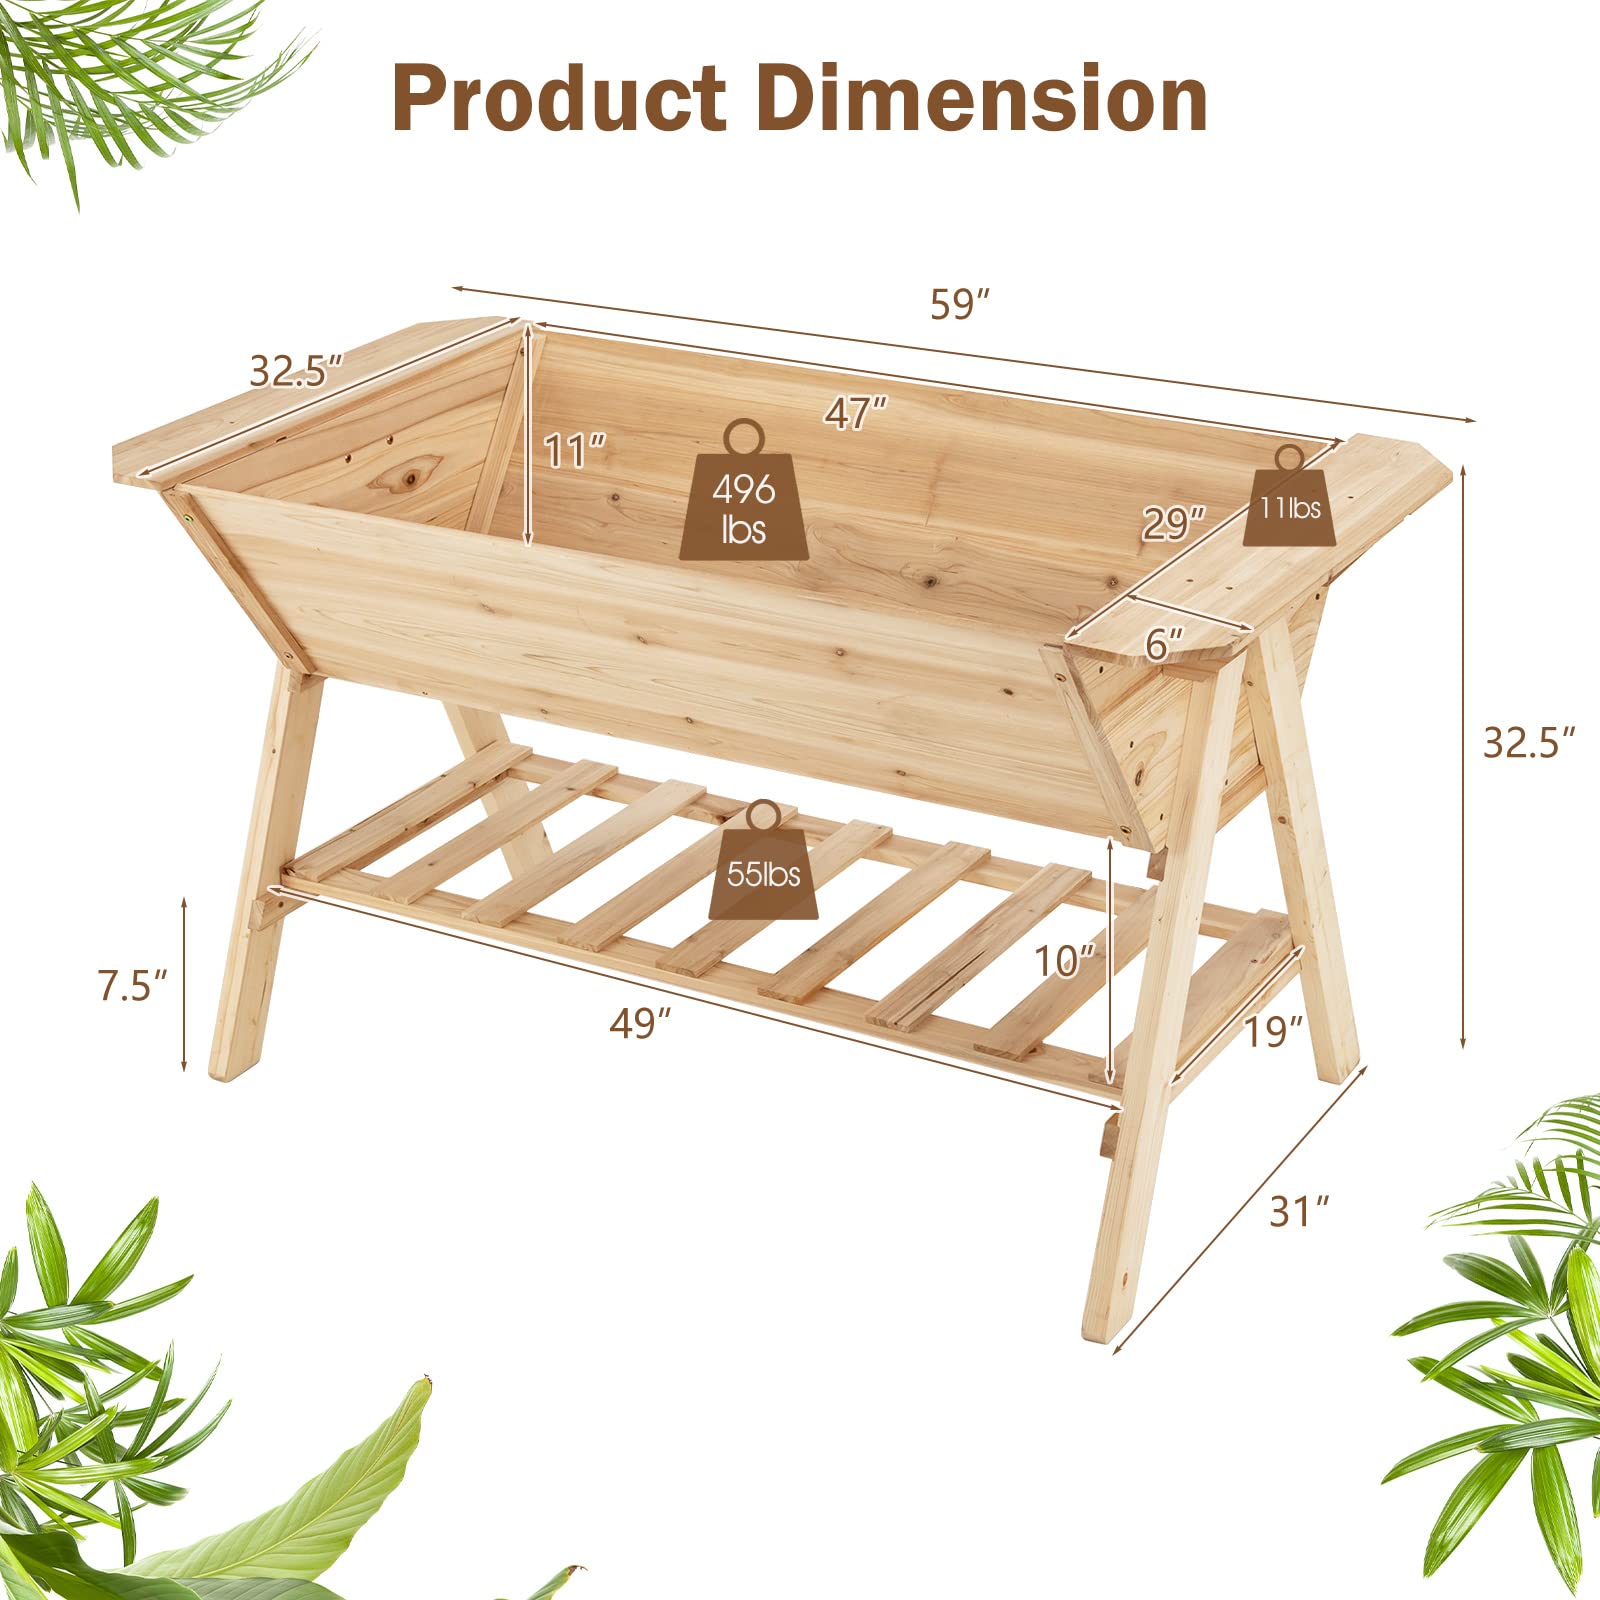 Giantex Plant Raised Bed 2 Tiers Garden Bed, Outdoor Fir Wood Plant Container with Storage Shelf